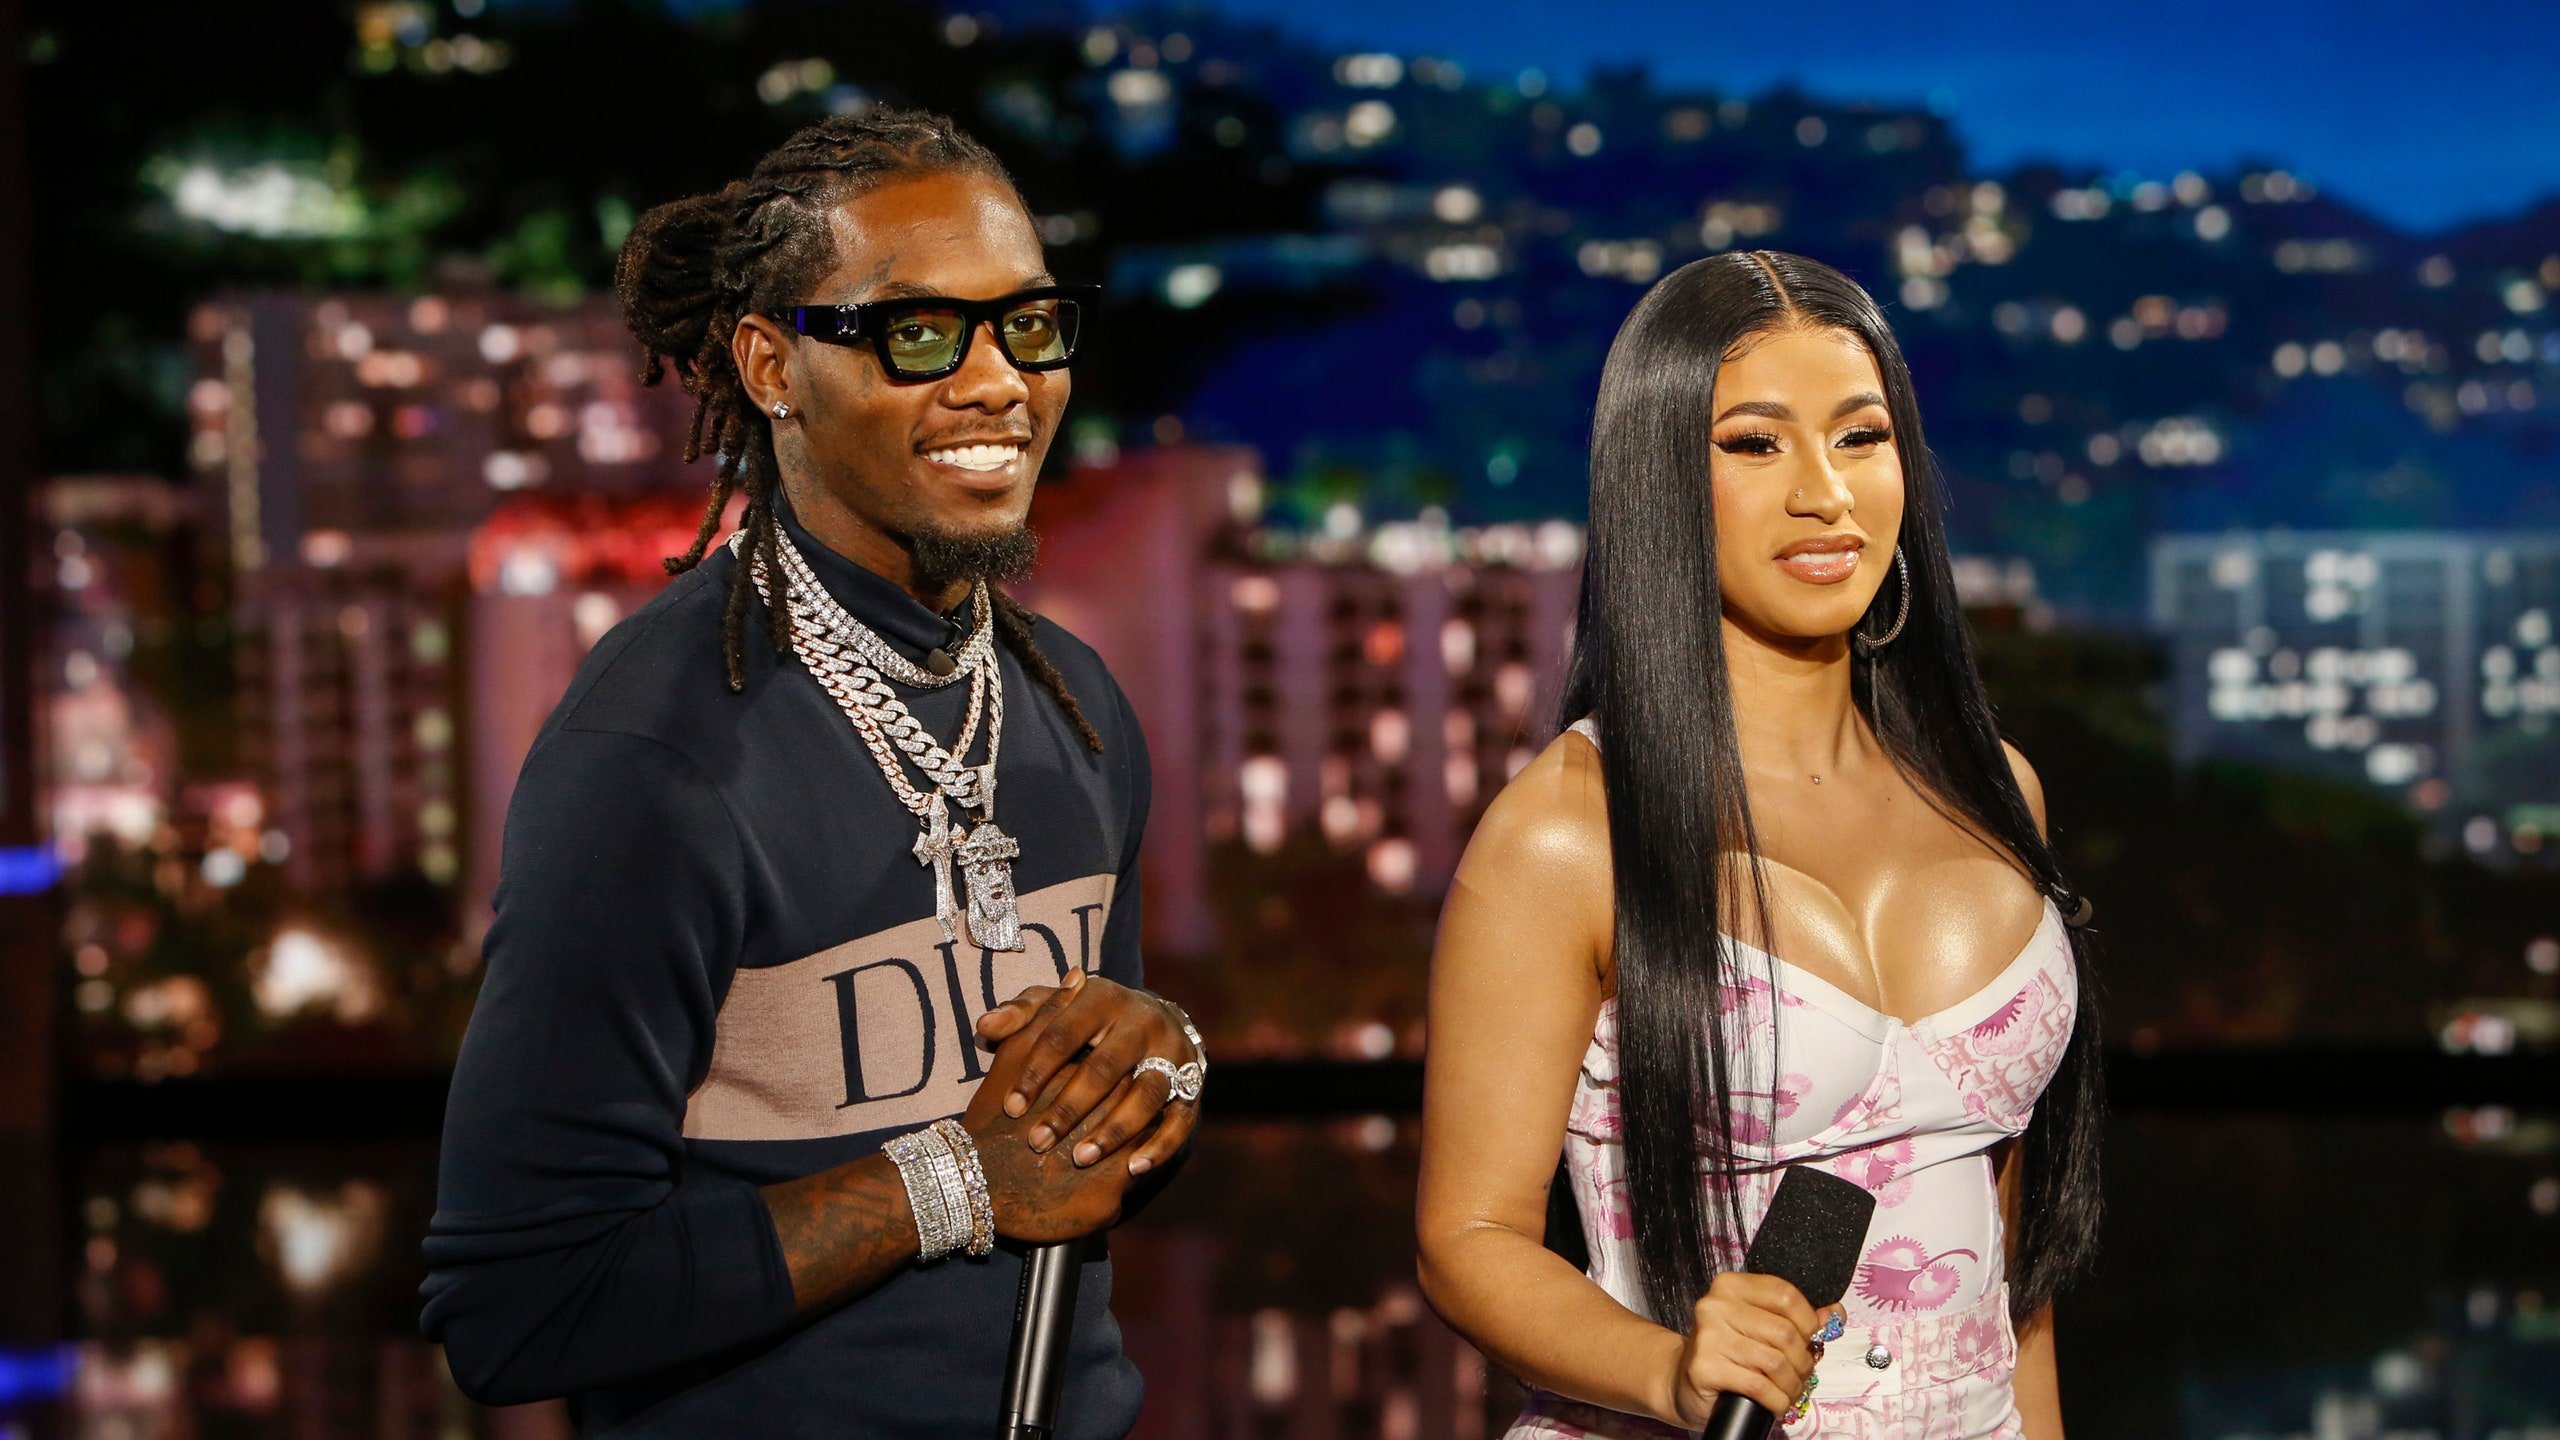 Cardi B Opened Up About Her Relationship With Offset and Cheating